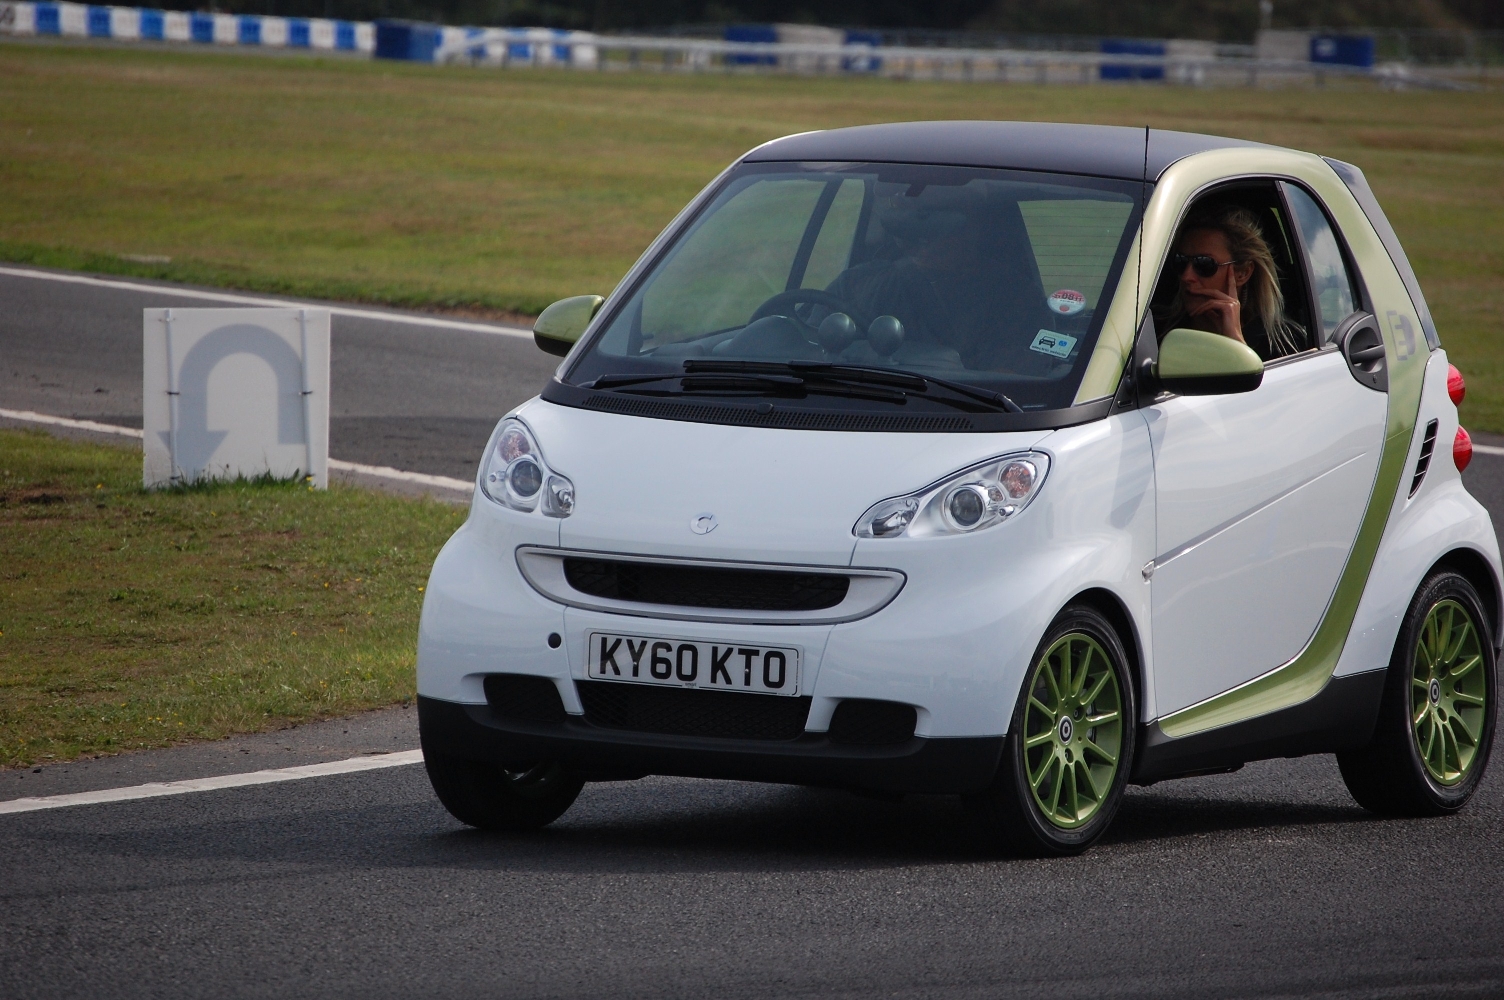 2011 Smart ForTwo Pulse - Drive